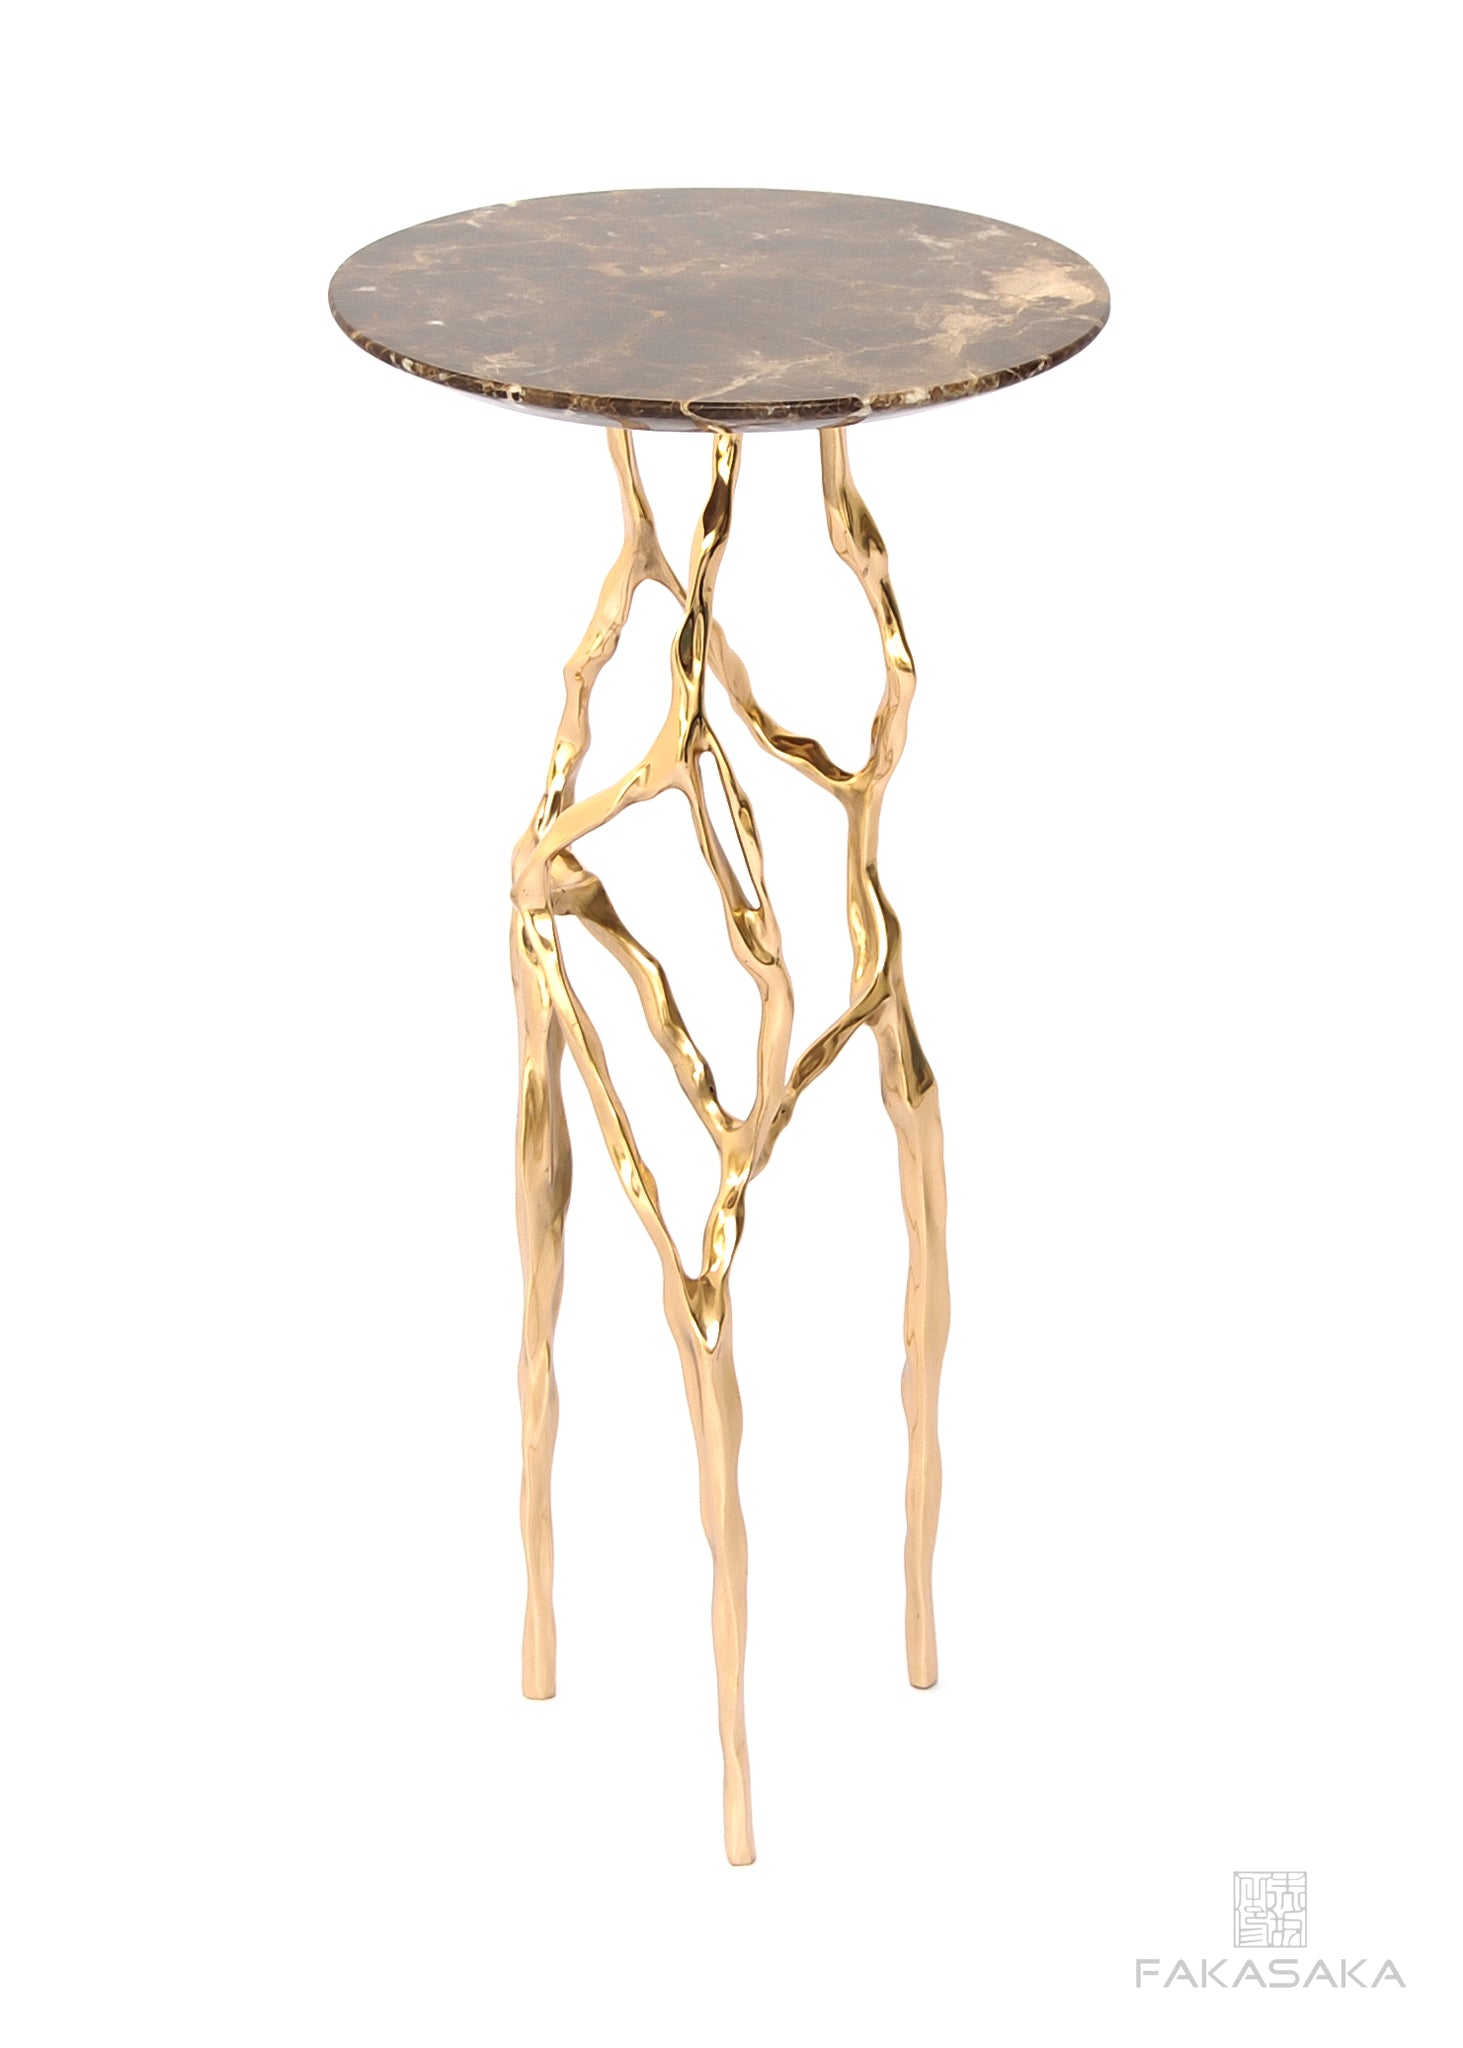 SID DRINK TABLE<br><br>MARRON IMPERIAL MARBLE<br>POLISHED BRONZE